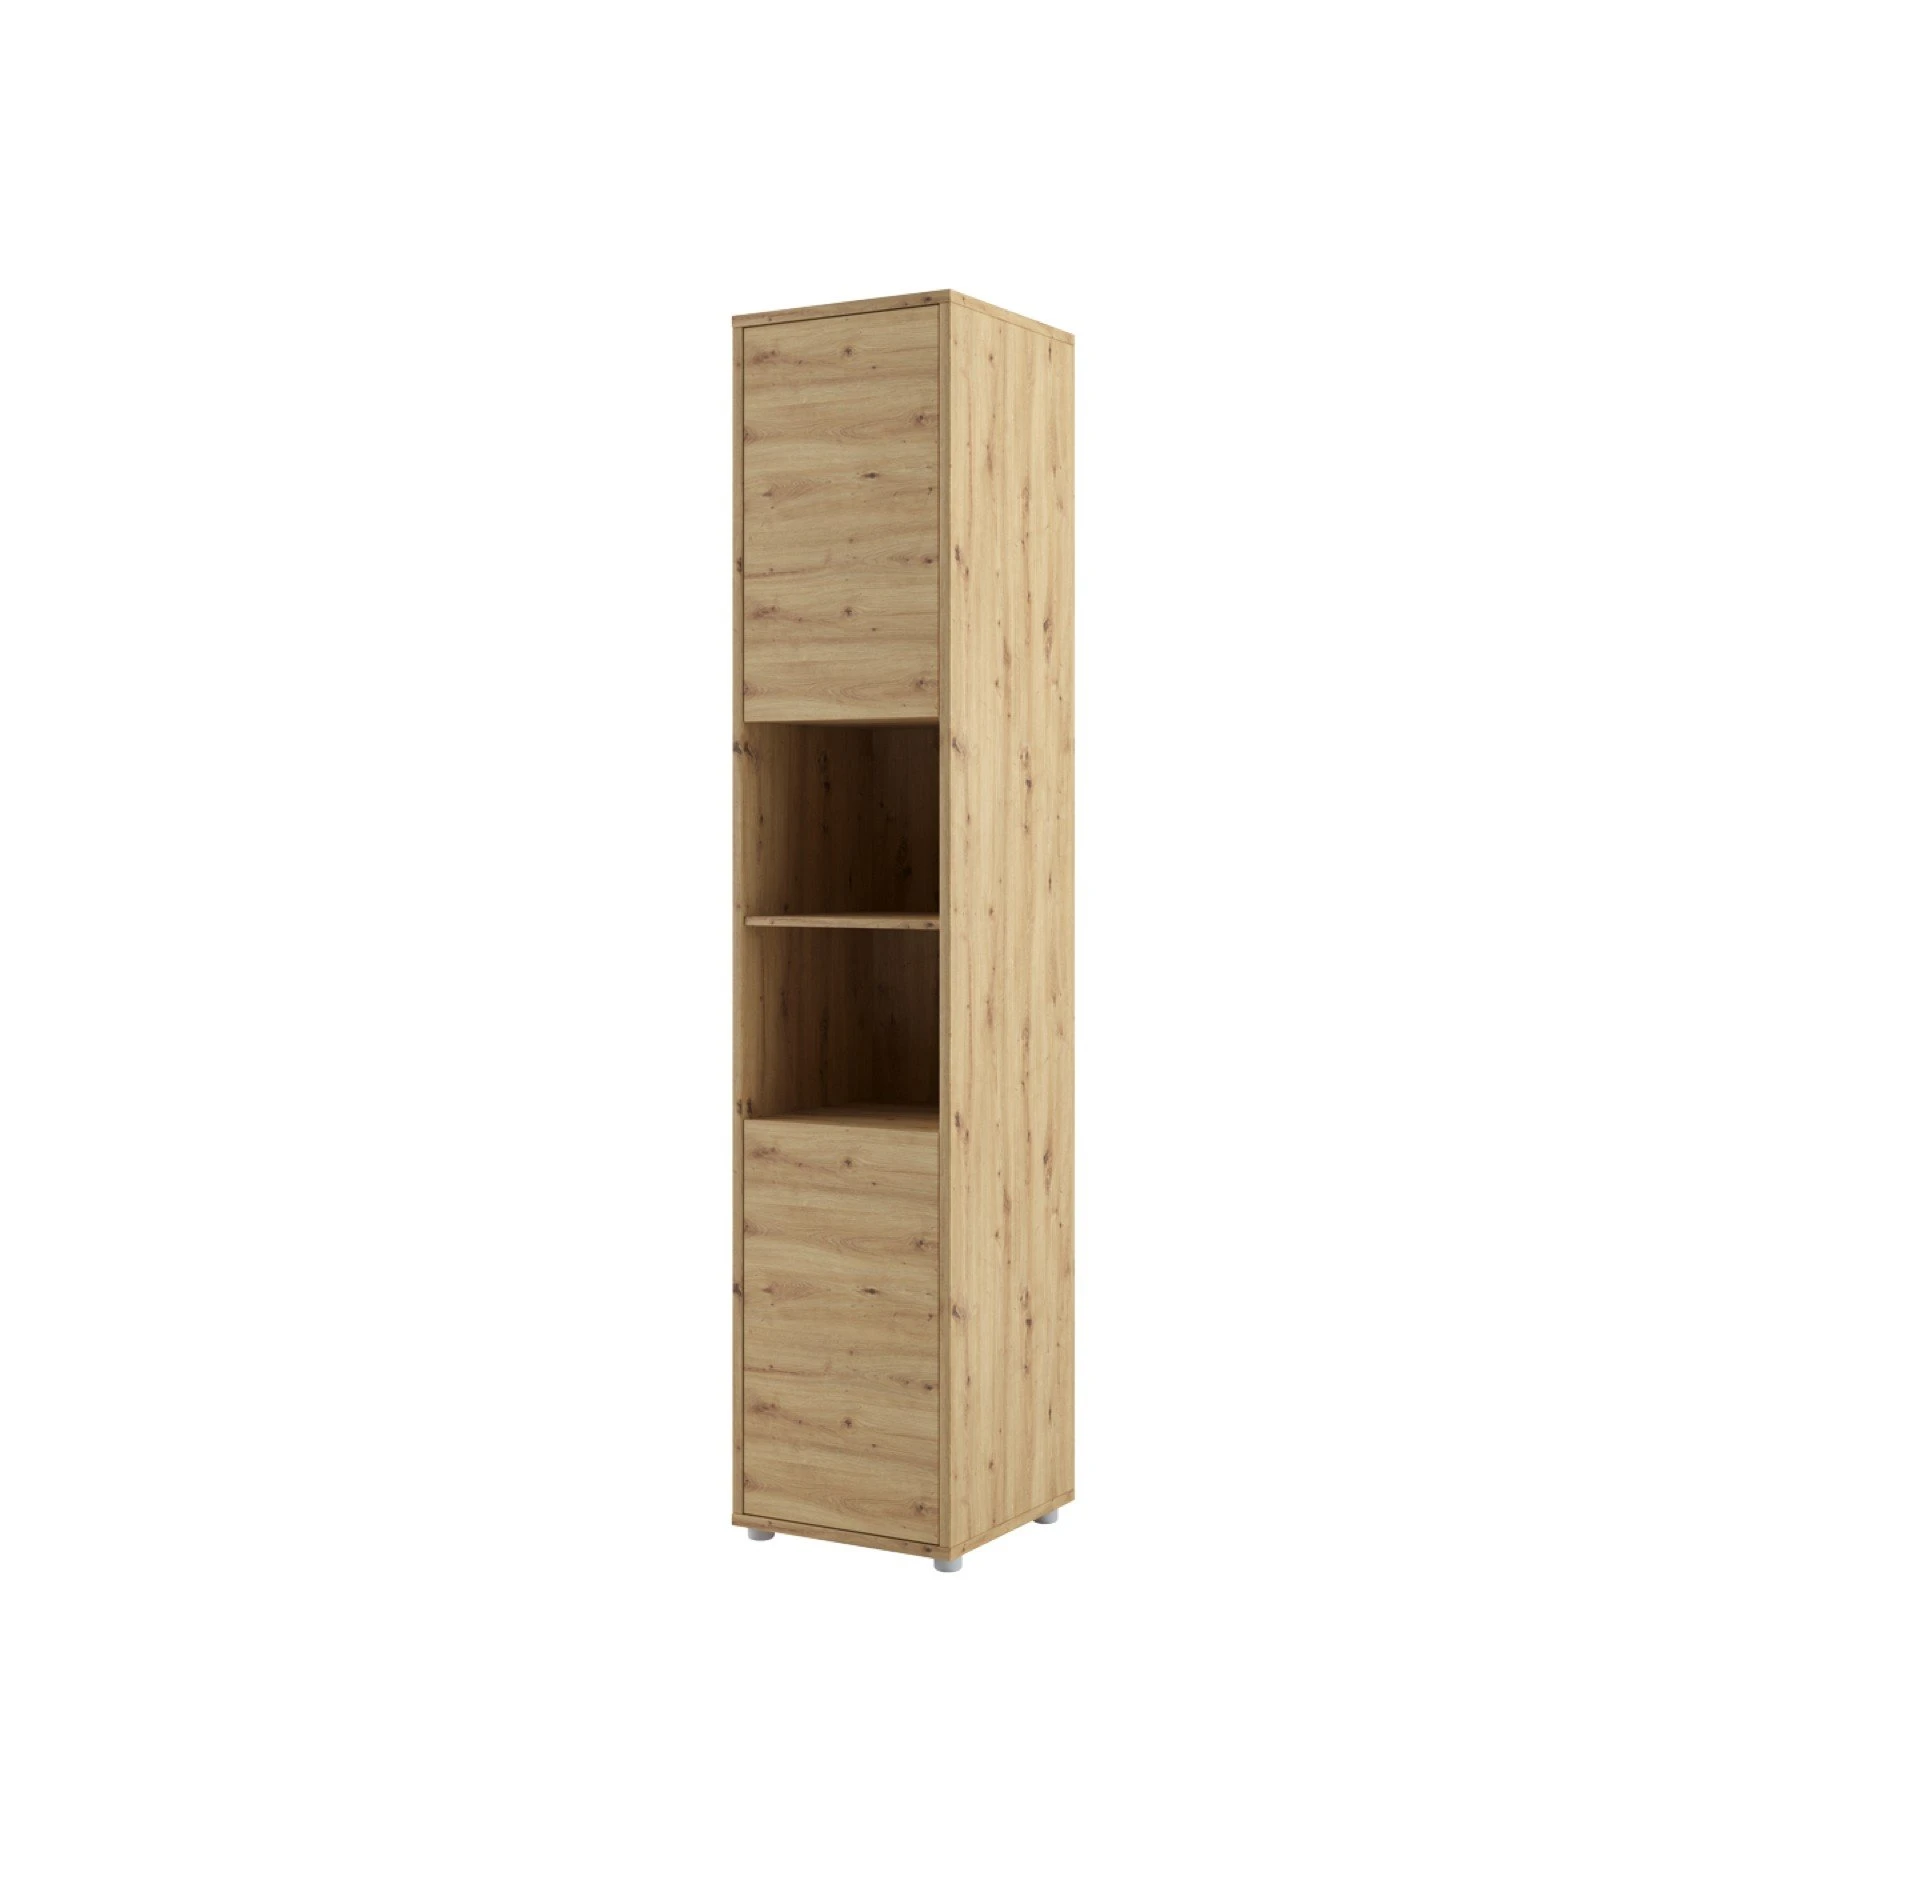 View BC08 Tall Storage Cabinet for Vertical Wall Bed Murphy Bed Concept Oak Artisan 45cm information